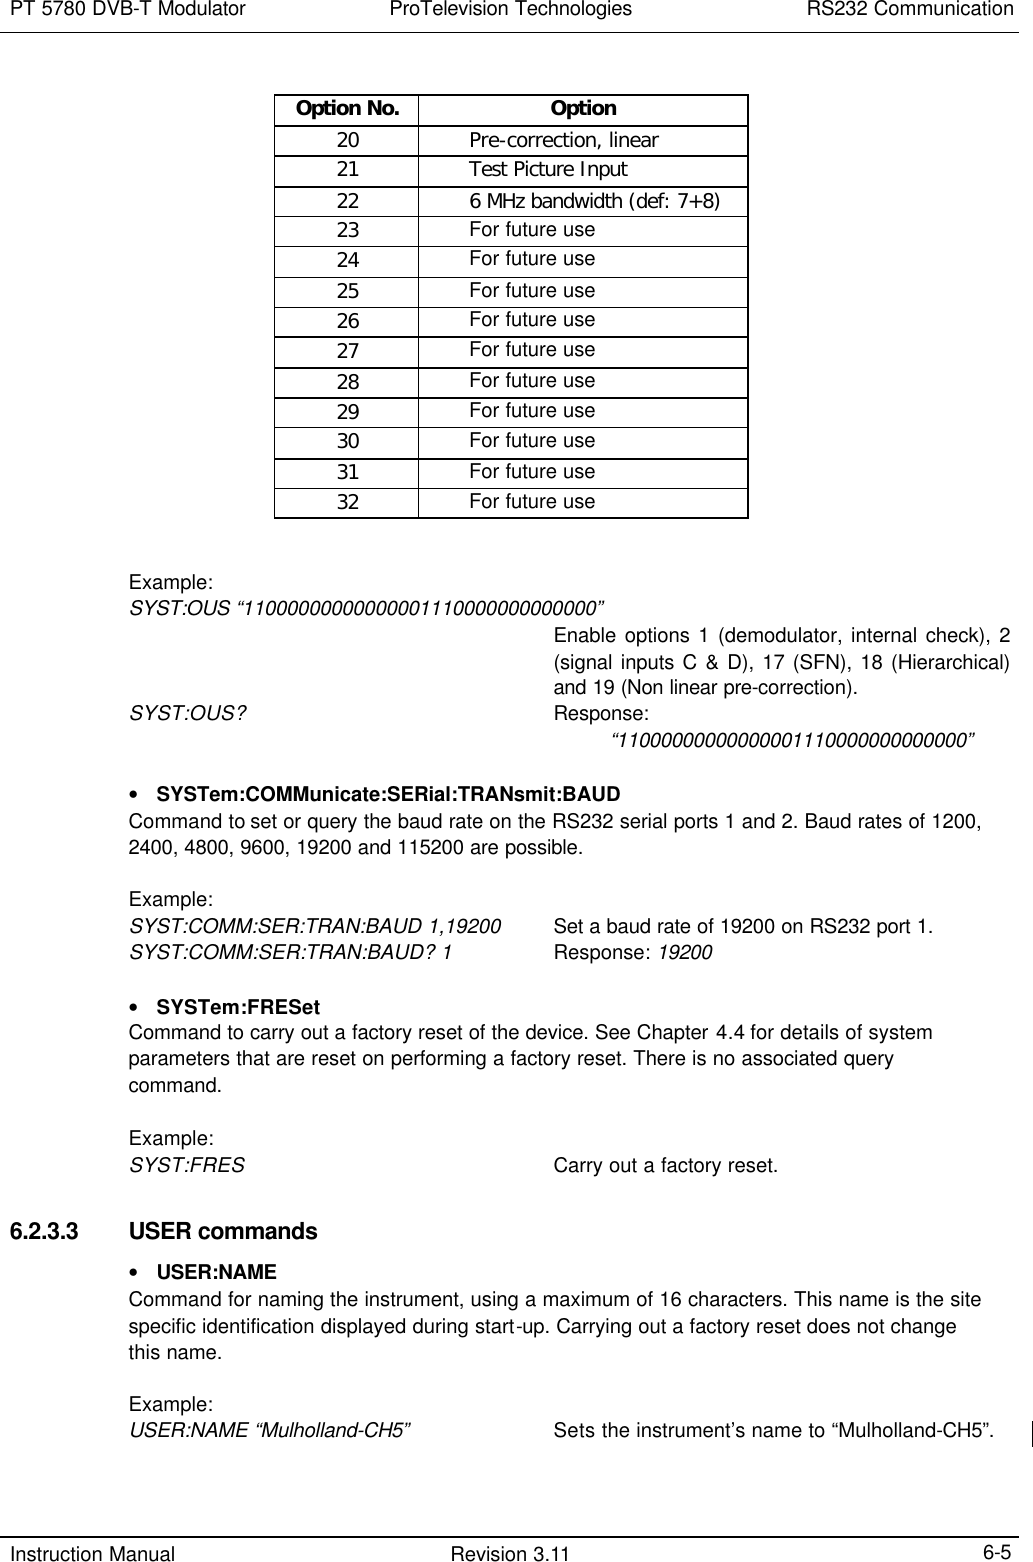 PT 5780 DVB-T Modulator ProTelevision Technologies RS232 Communication  Instruction Manual Revision 3.11    6-5 Option No. Option 20    Pre-correction, linear 21    Test Picture Input 22    6 MHz bandwidth (def: 7+8) 23    For future use 24    For future use 25    For future use 26    For future use 27    For future use 28    For future use 29    For future use 30    For future use 31    For future use 32    For future use   Example: SYST:OUS “11000000000000001110000000000000”   Enable options 1 (demodulator, internal check), 2 (signal inputs C &amp; D), 17 (SFN), 18 (Hierarchical)  and 19 (Non linear pre-correction). SYST:OUS?   Response:          “11000000000000001110000000000000”  • SYSTem:COMMunicate:SERial:TRANsmit:BAUD Command to set or query the baud rate on the RS232 serial ports 1 and 2. Baud rates of 1200, 2400, 4800, 9600, 19200 and 115200 are possible.  Example: SYST:COMM:SER:TRAN:BAUD 1,19200 Set a baud rate of 19200 on RS232 port 1. SYST:COMM:SER:TRAN:BAUD? 1 Response: 19200  • SYSTem:FRESet Command to carry out a factory reset of the device. See Chapter 4.4 for details of system parameters that are reset on performing a factory reset. There is no associated query command.  Example: SYST:FRES   Carry out a factory reset.  6.2.3.3 USER commands • USER:NAME Command for naming the instrument, using a maximum of 16 characters. This name is the site specific identification displayed during start-up. Carrying out a factory reset does not change this name.  Example: USER:NAME “Mulholland-CH5” Sets the instrument’s name to “Mulholland-CH5”.   